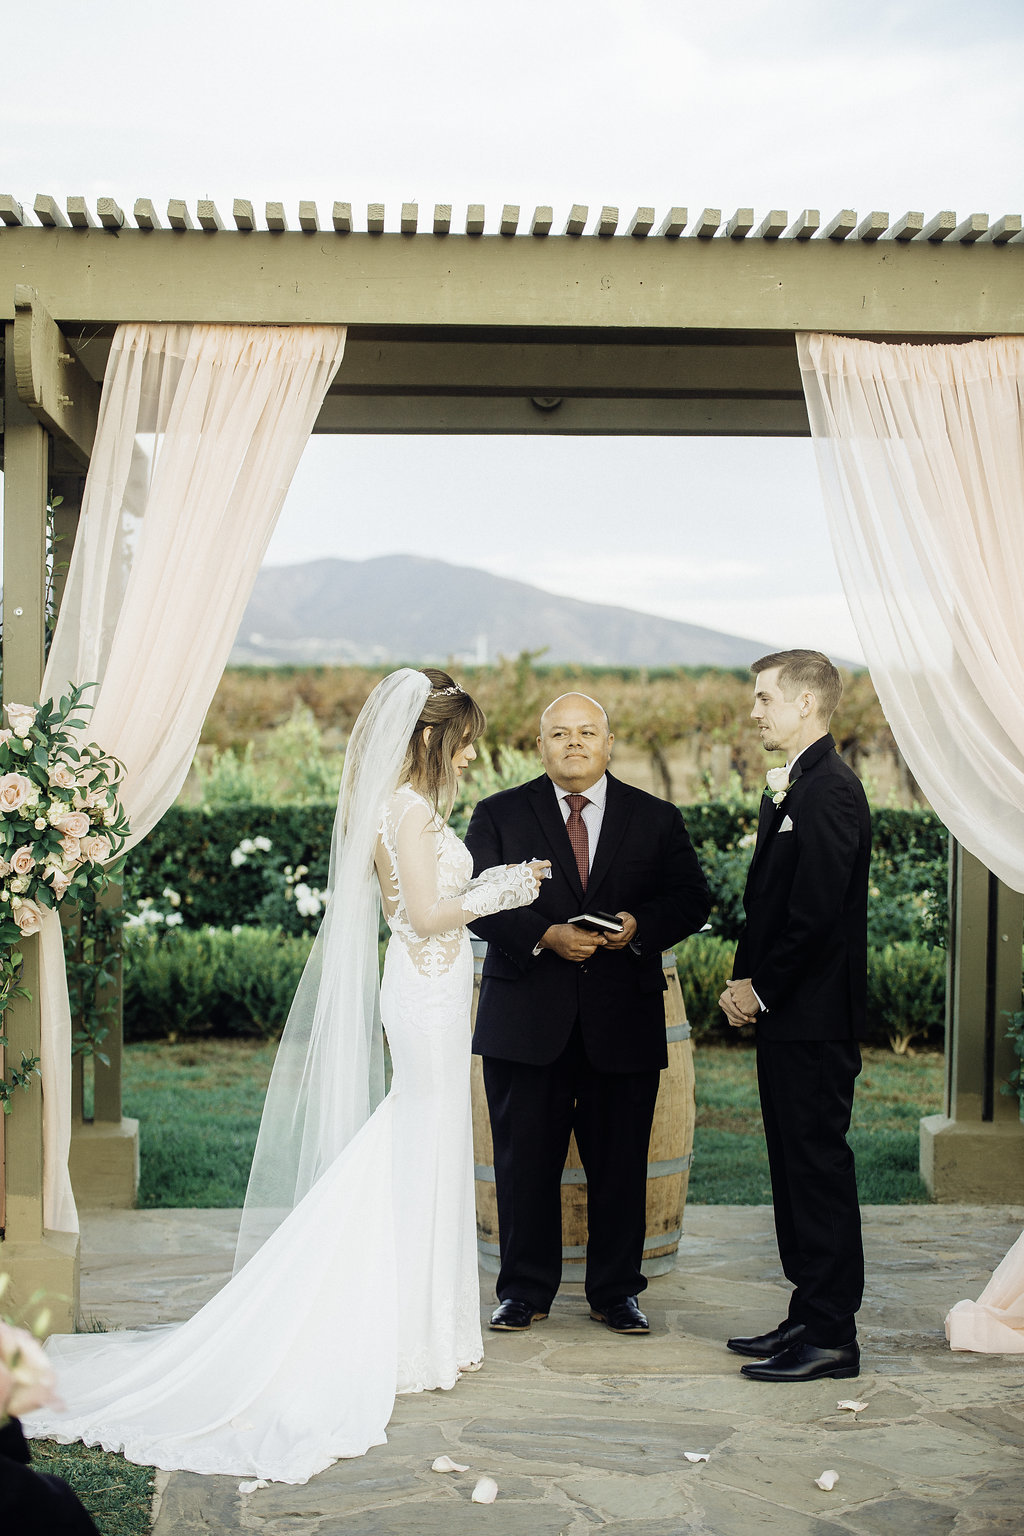 Wedding Photograph Of Two Men in Black Suit Looking at The Bride Los Angeles